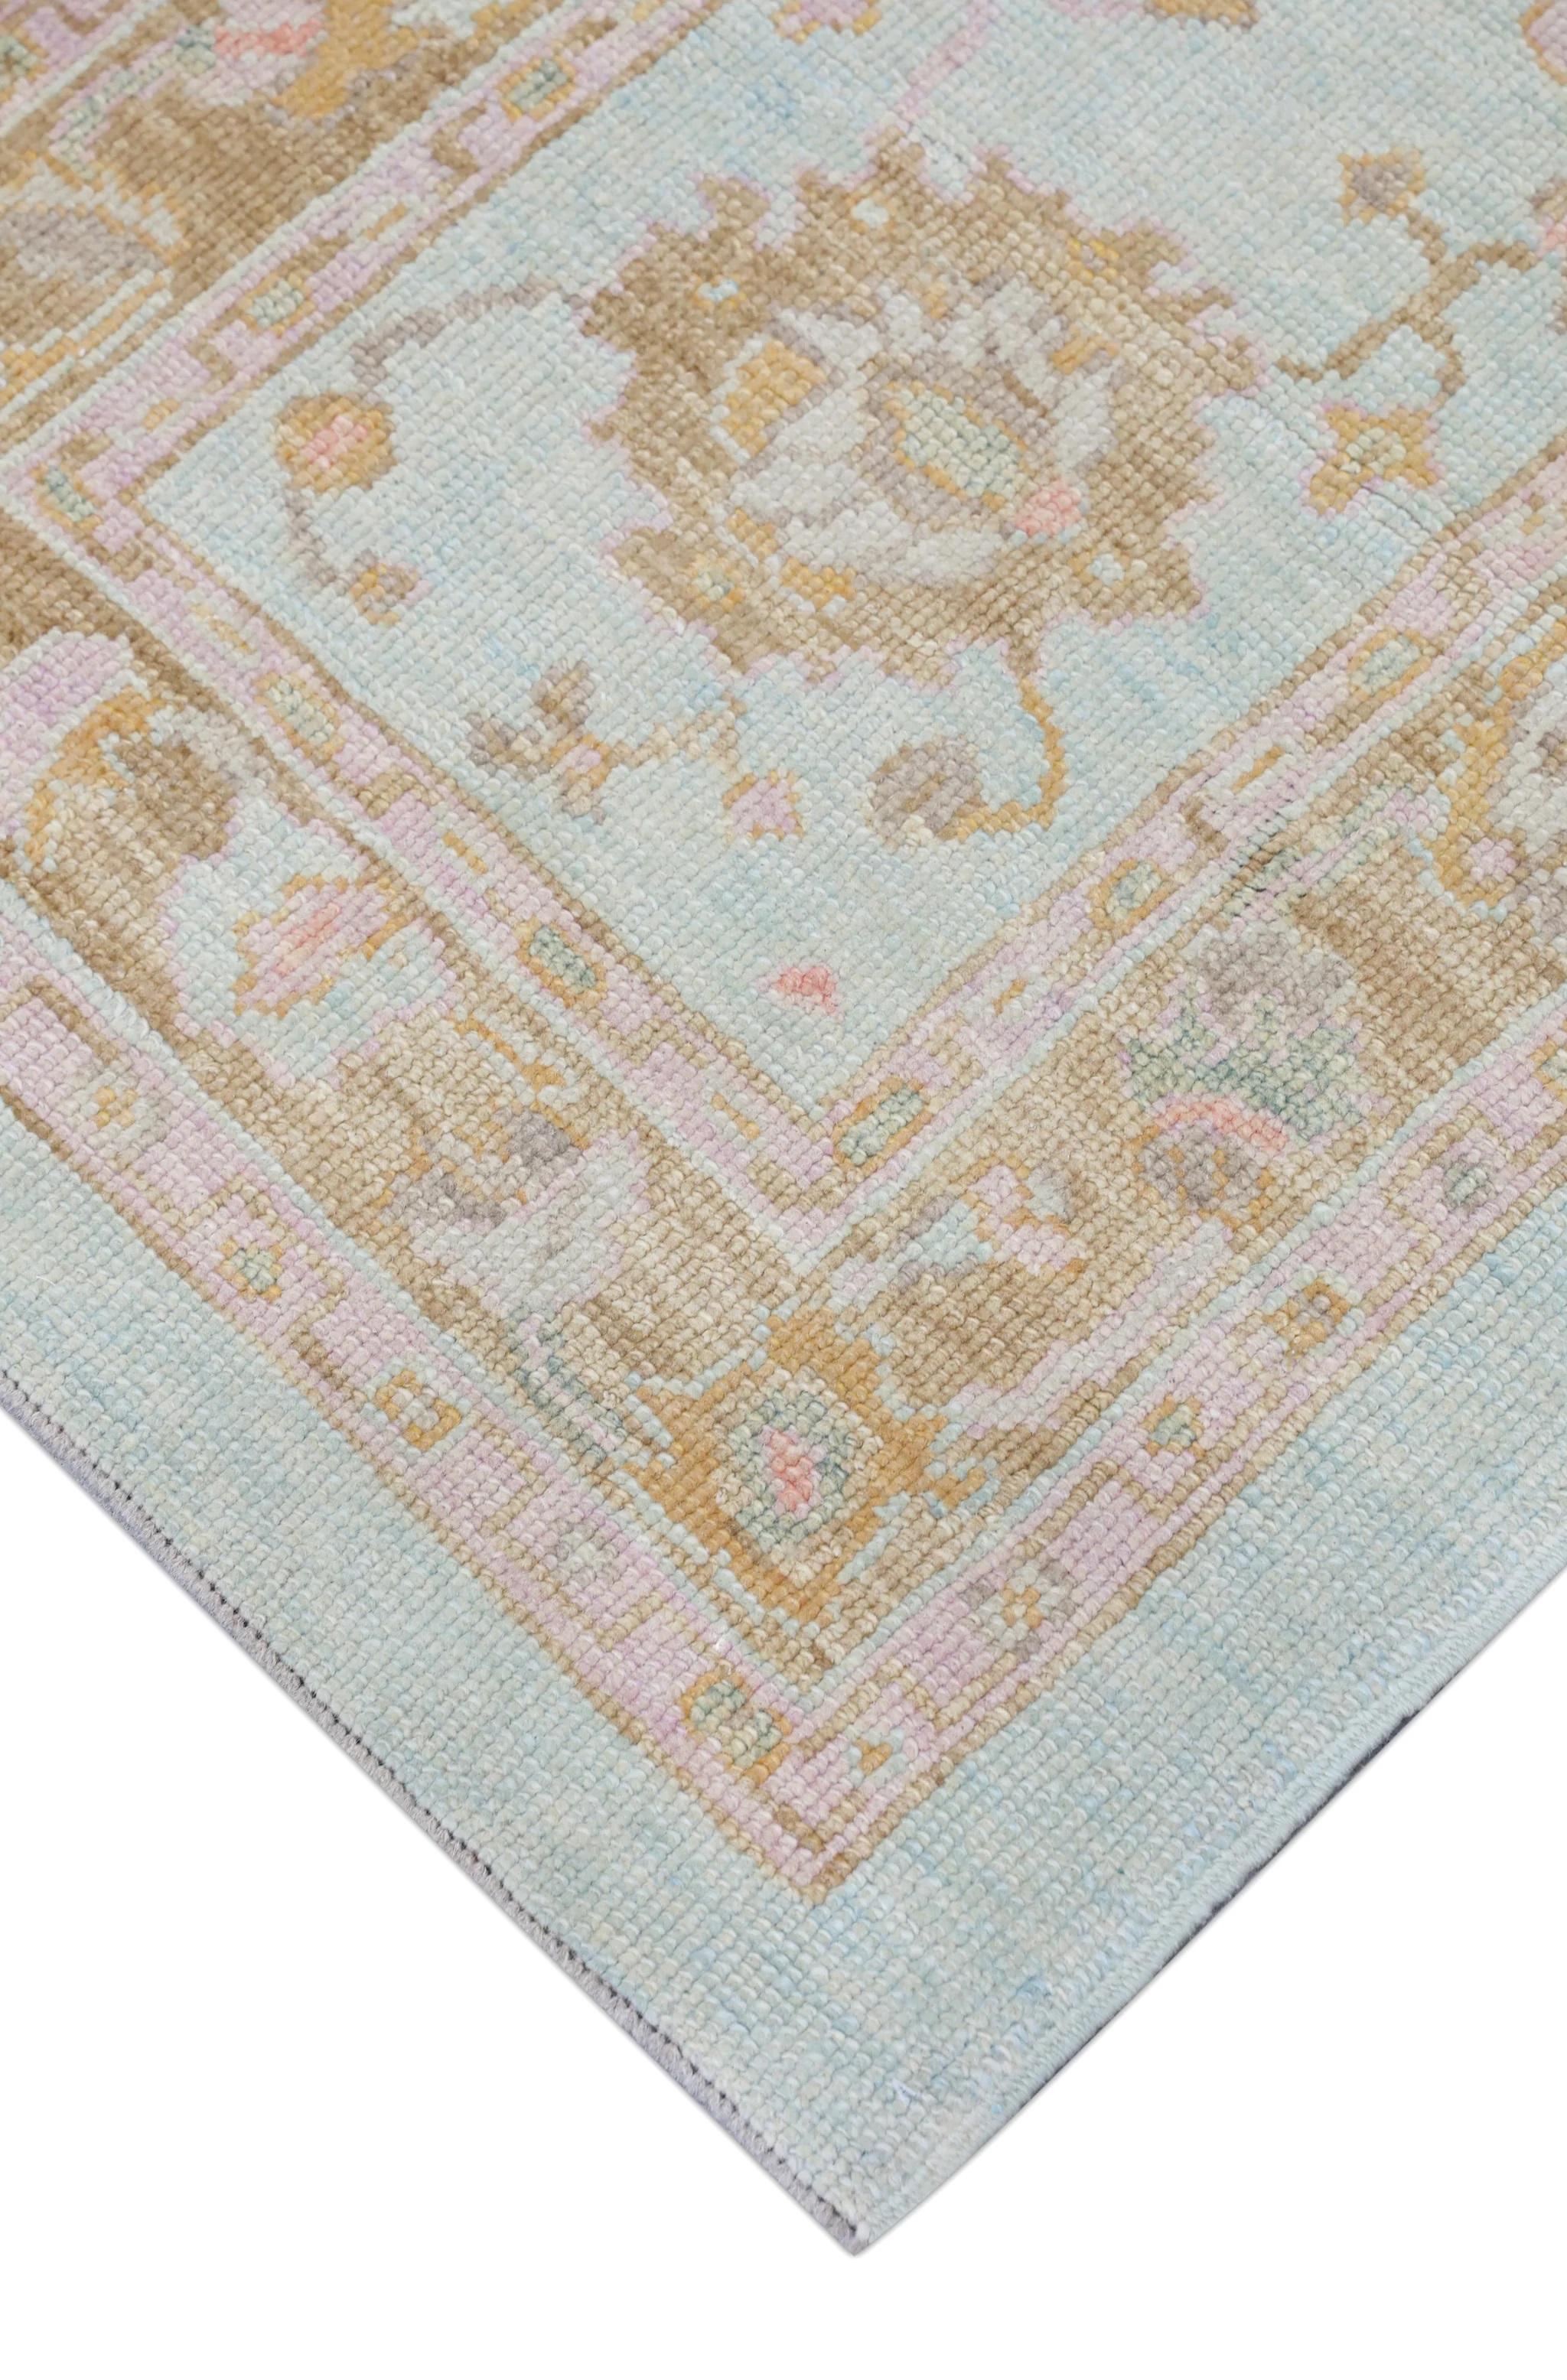 Soft Blue Handwoven Wool Turkish Oushak Rug with Colorful Floral Design 3' x 6'3 For Sale 1